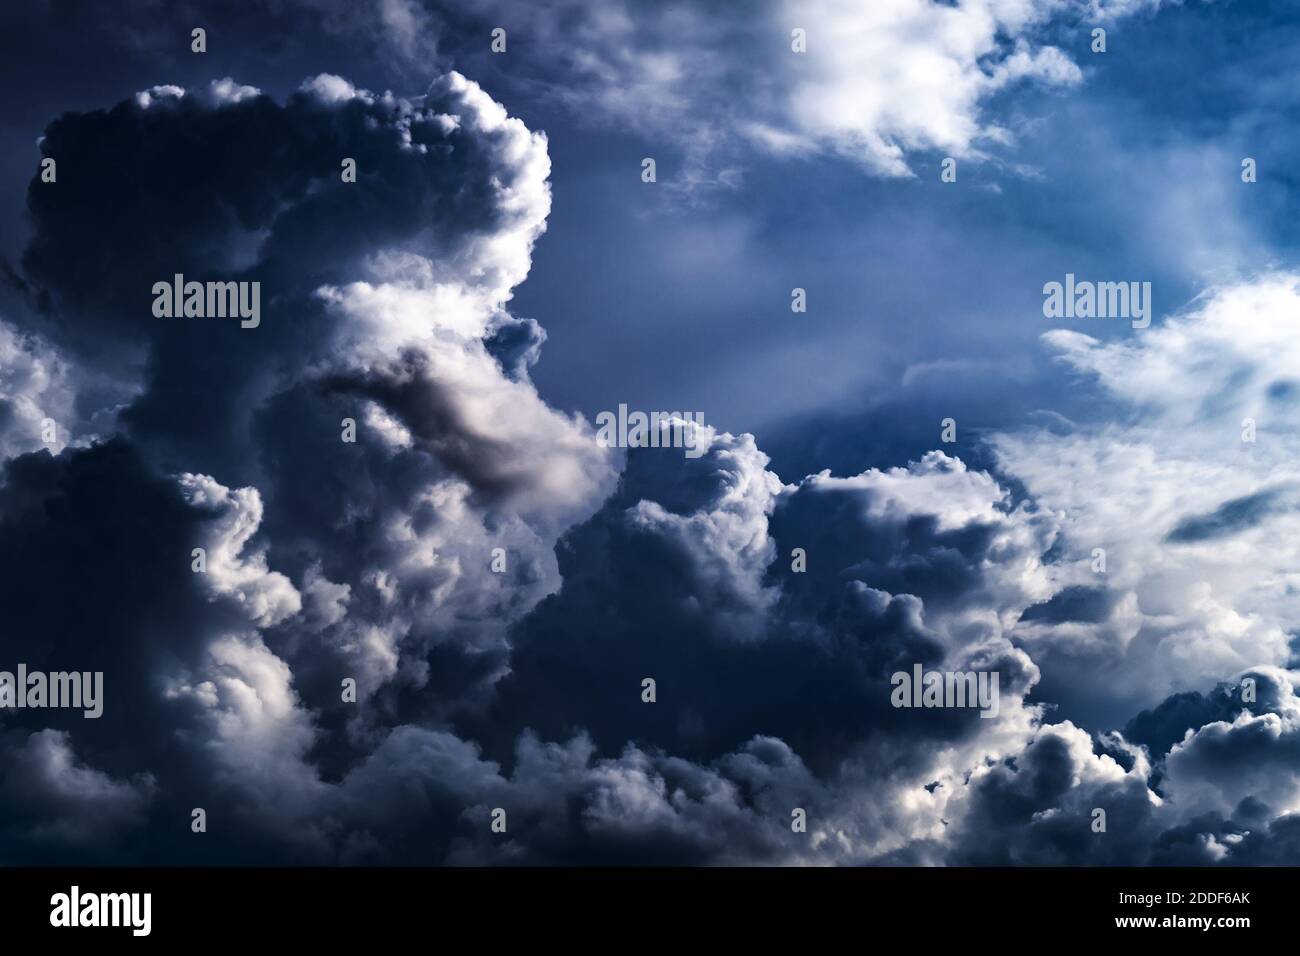 Dark and Dramatic Storm Clouds Area Background Stock Photo